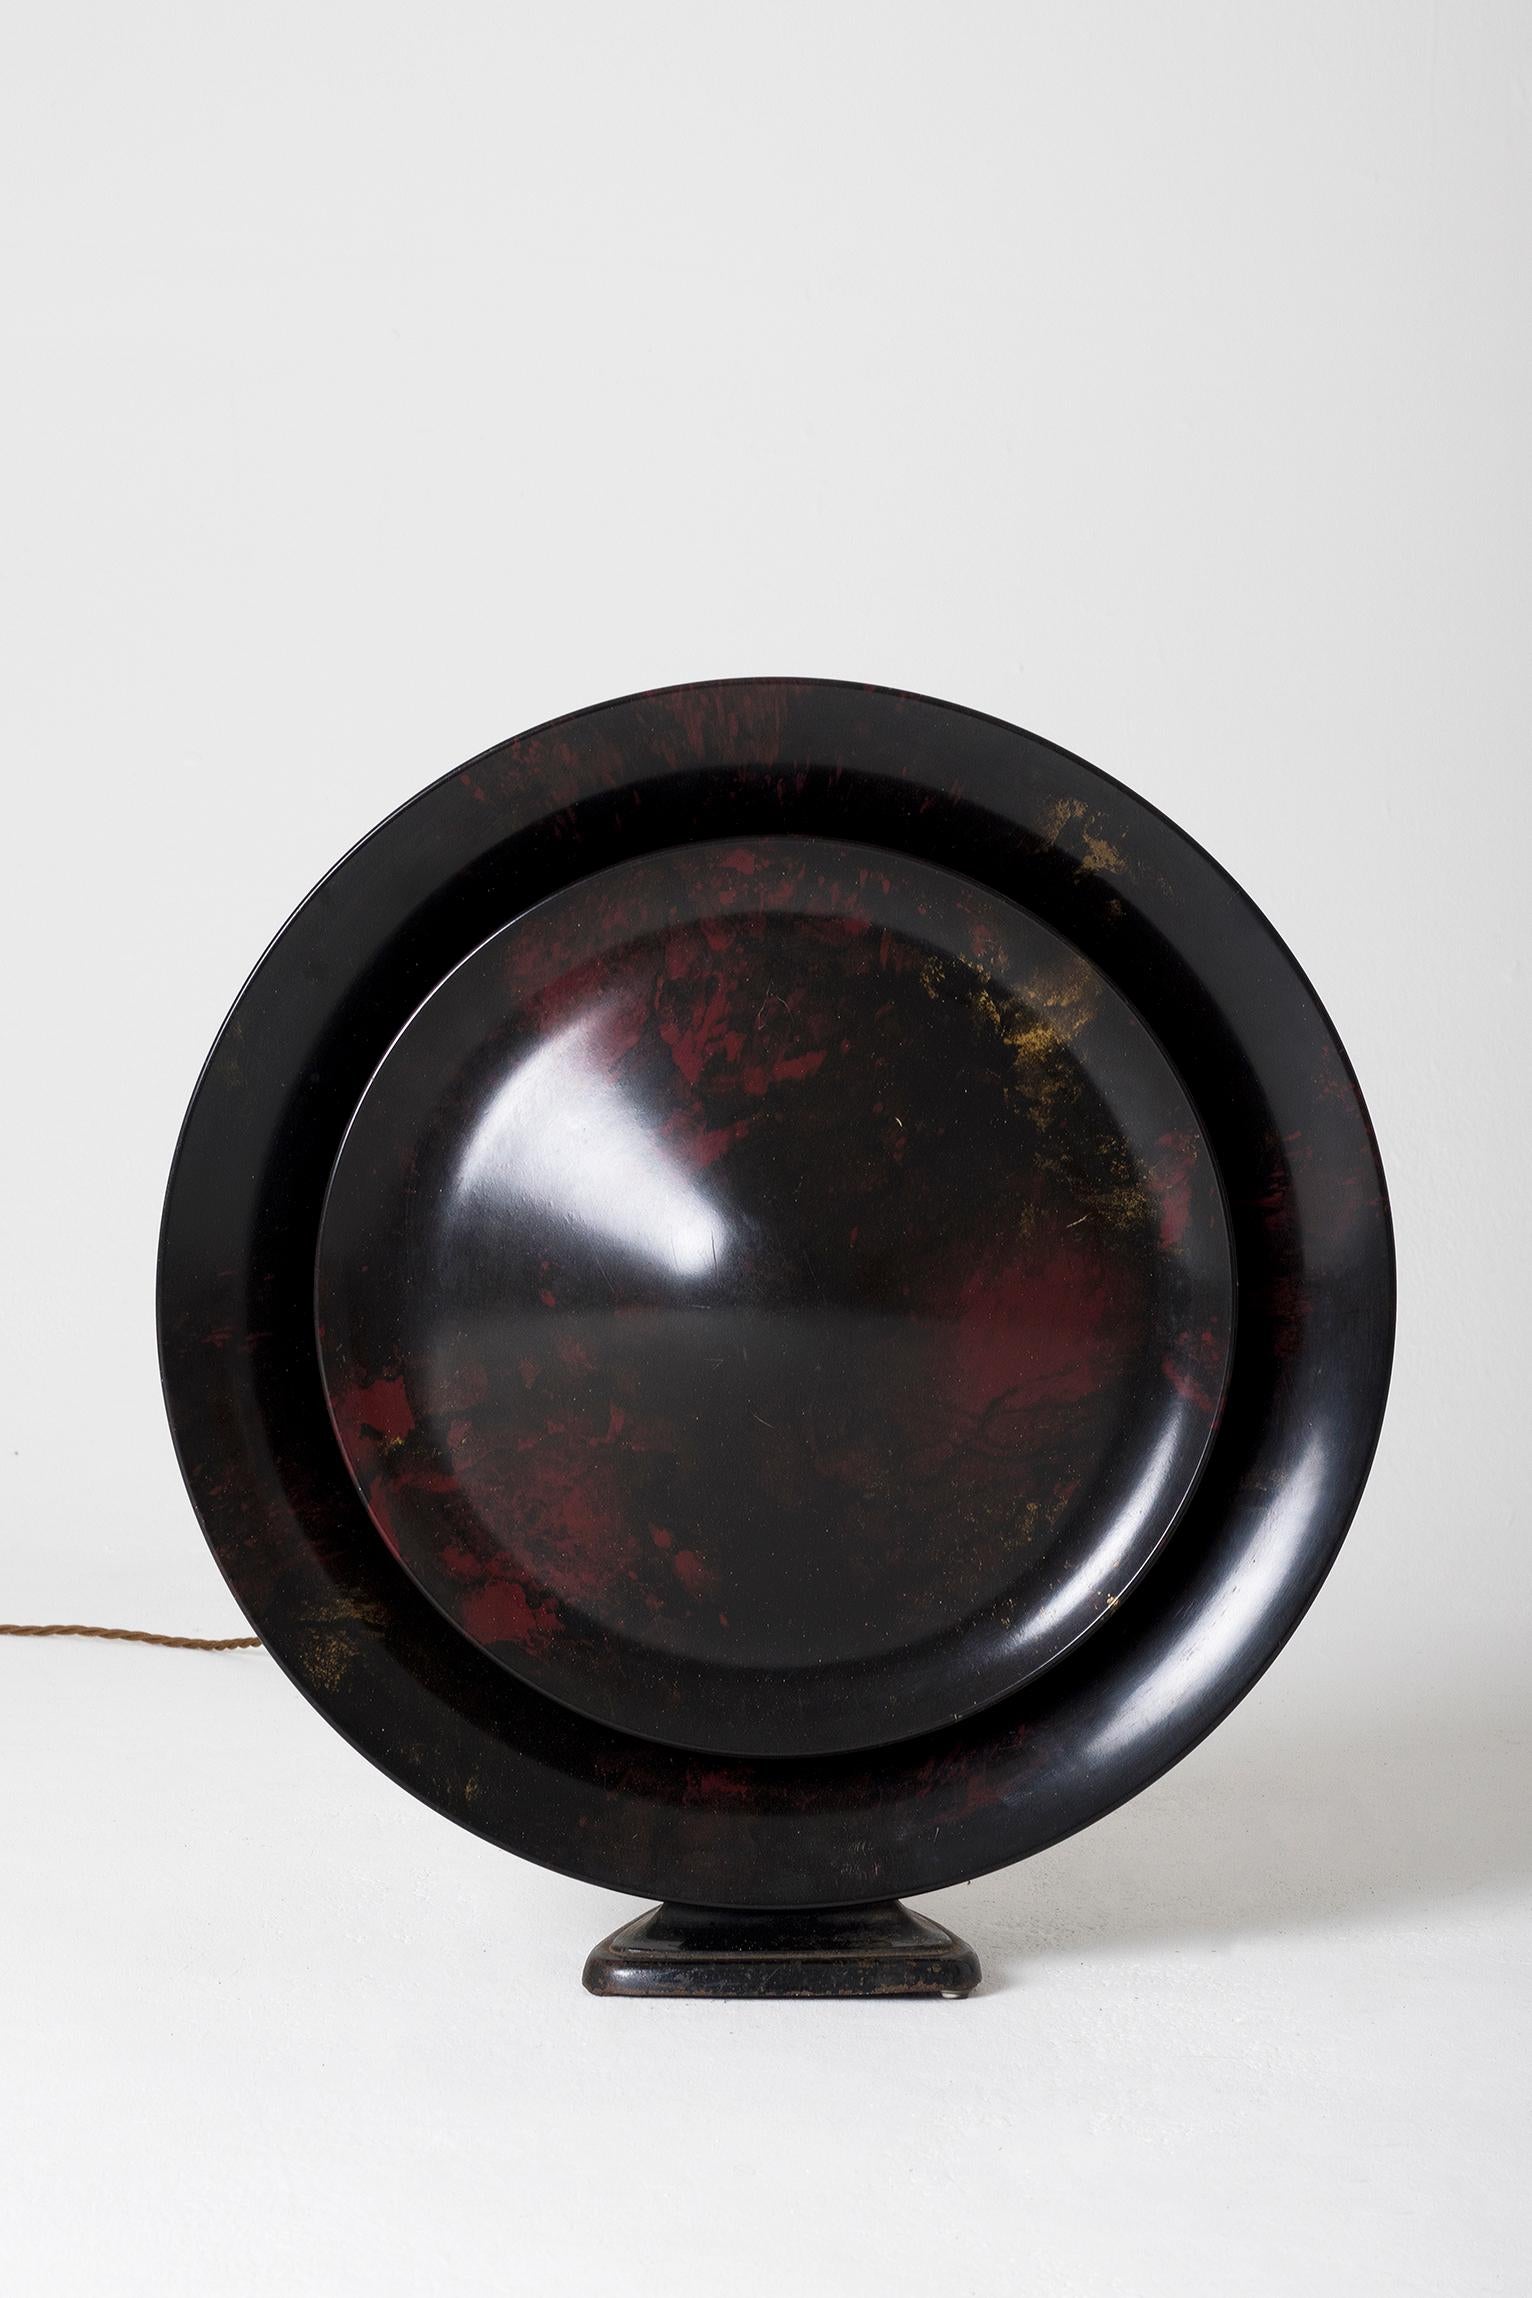 An Art Deco bakelite speaker converted into lamp, the internal lighting creating a solar eclipse like effect. 
The bakelite with inclusions of reds and gold, reminding Japanese lacquer Jingasas. 
France, circa 1930.